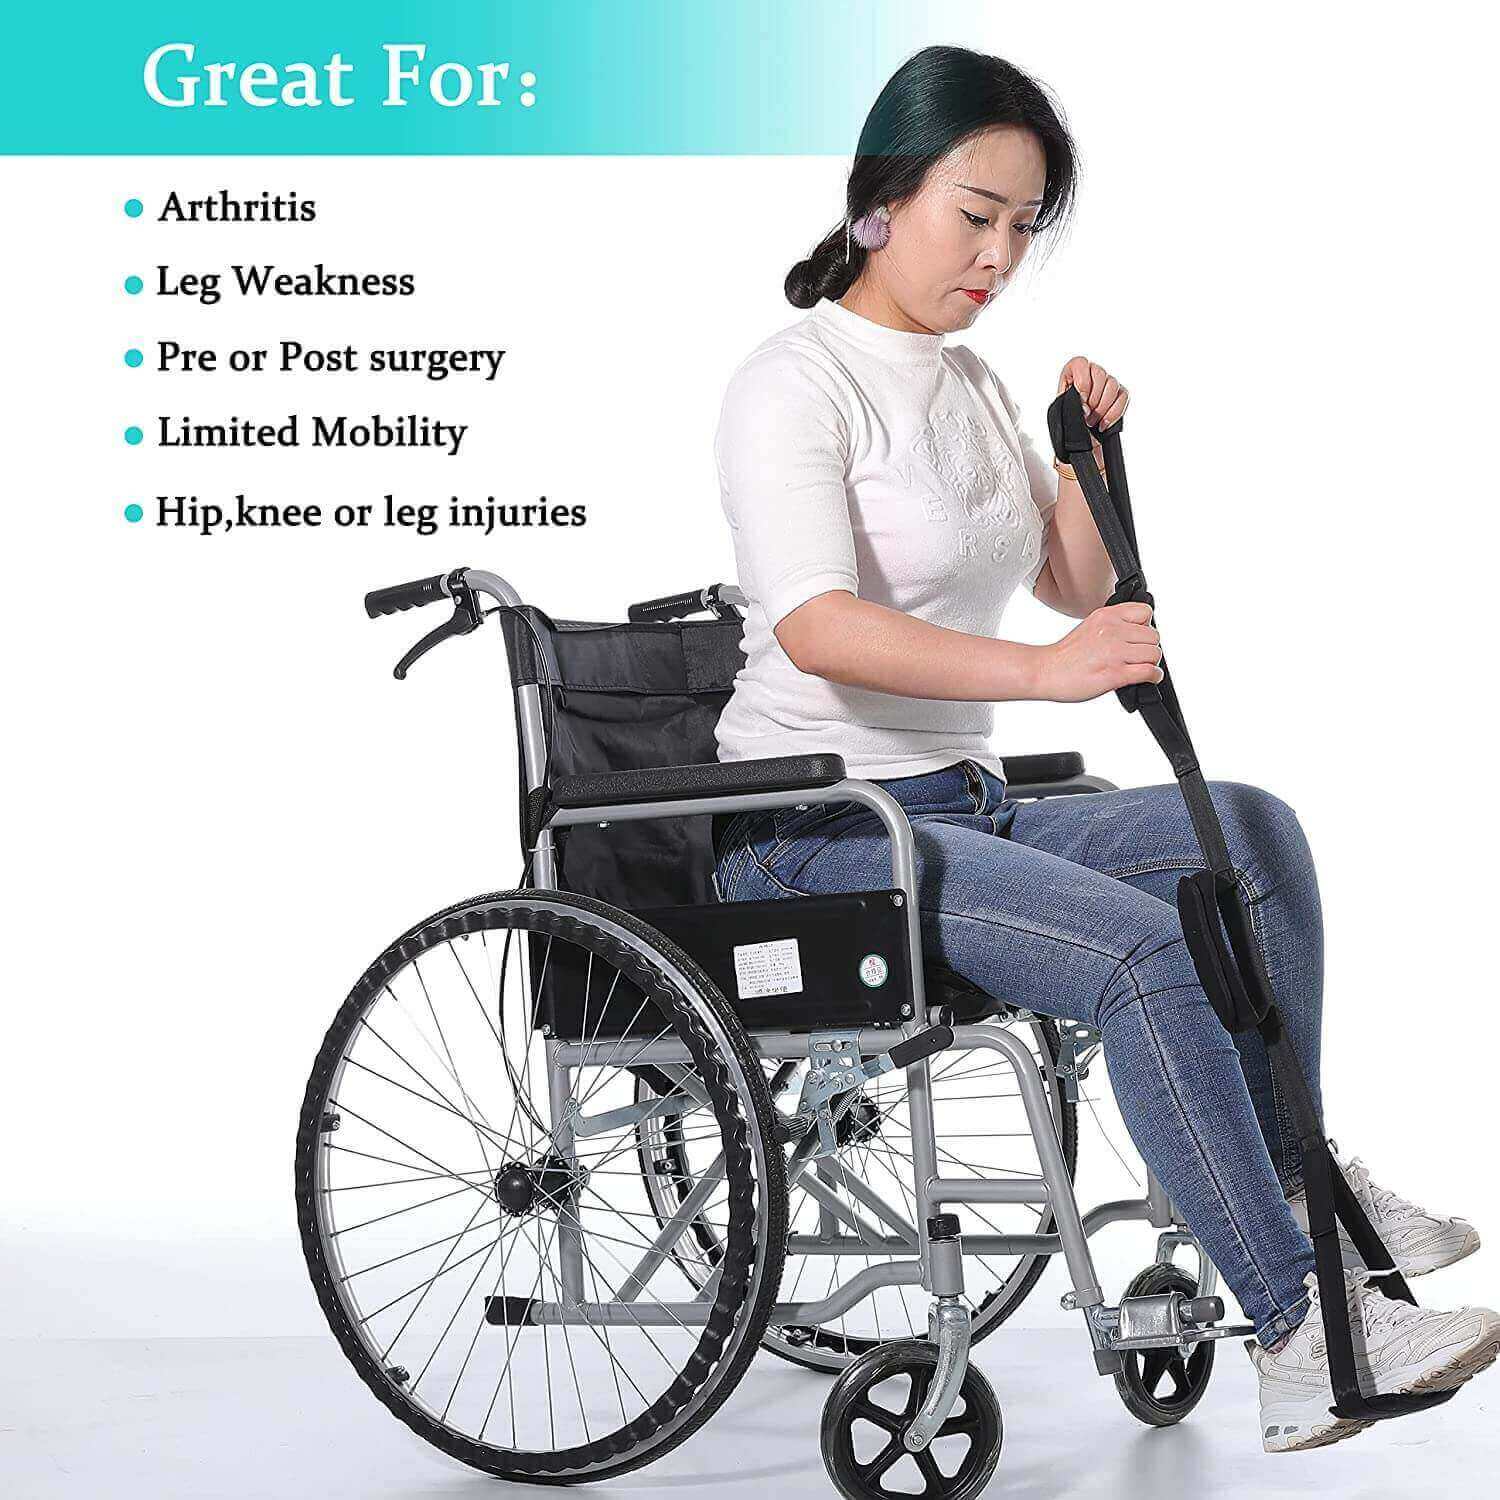 Fanwer Leg Lifter Strap for Transfer Aids, user using it on the wheelchair 